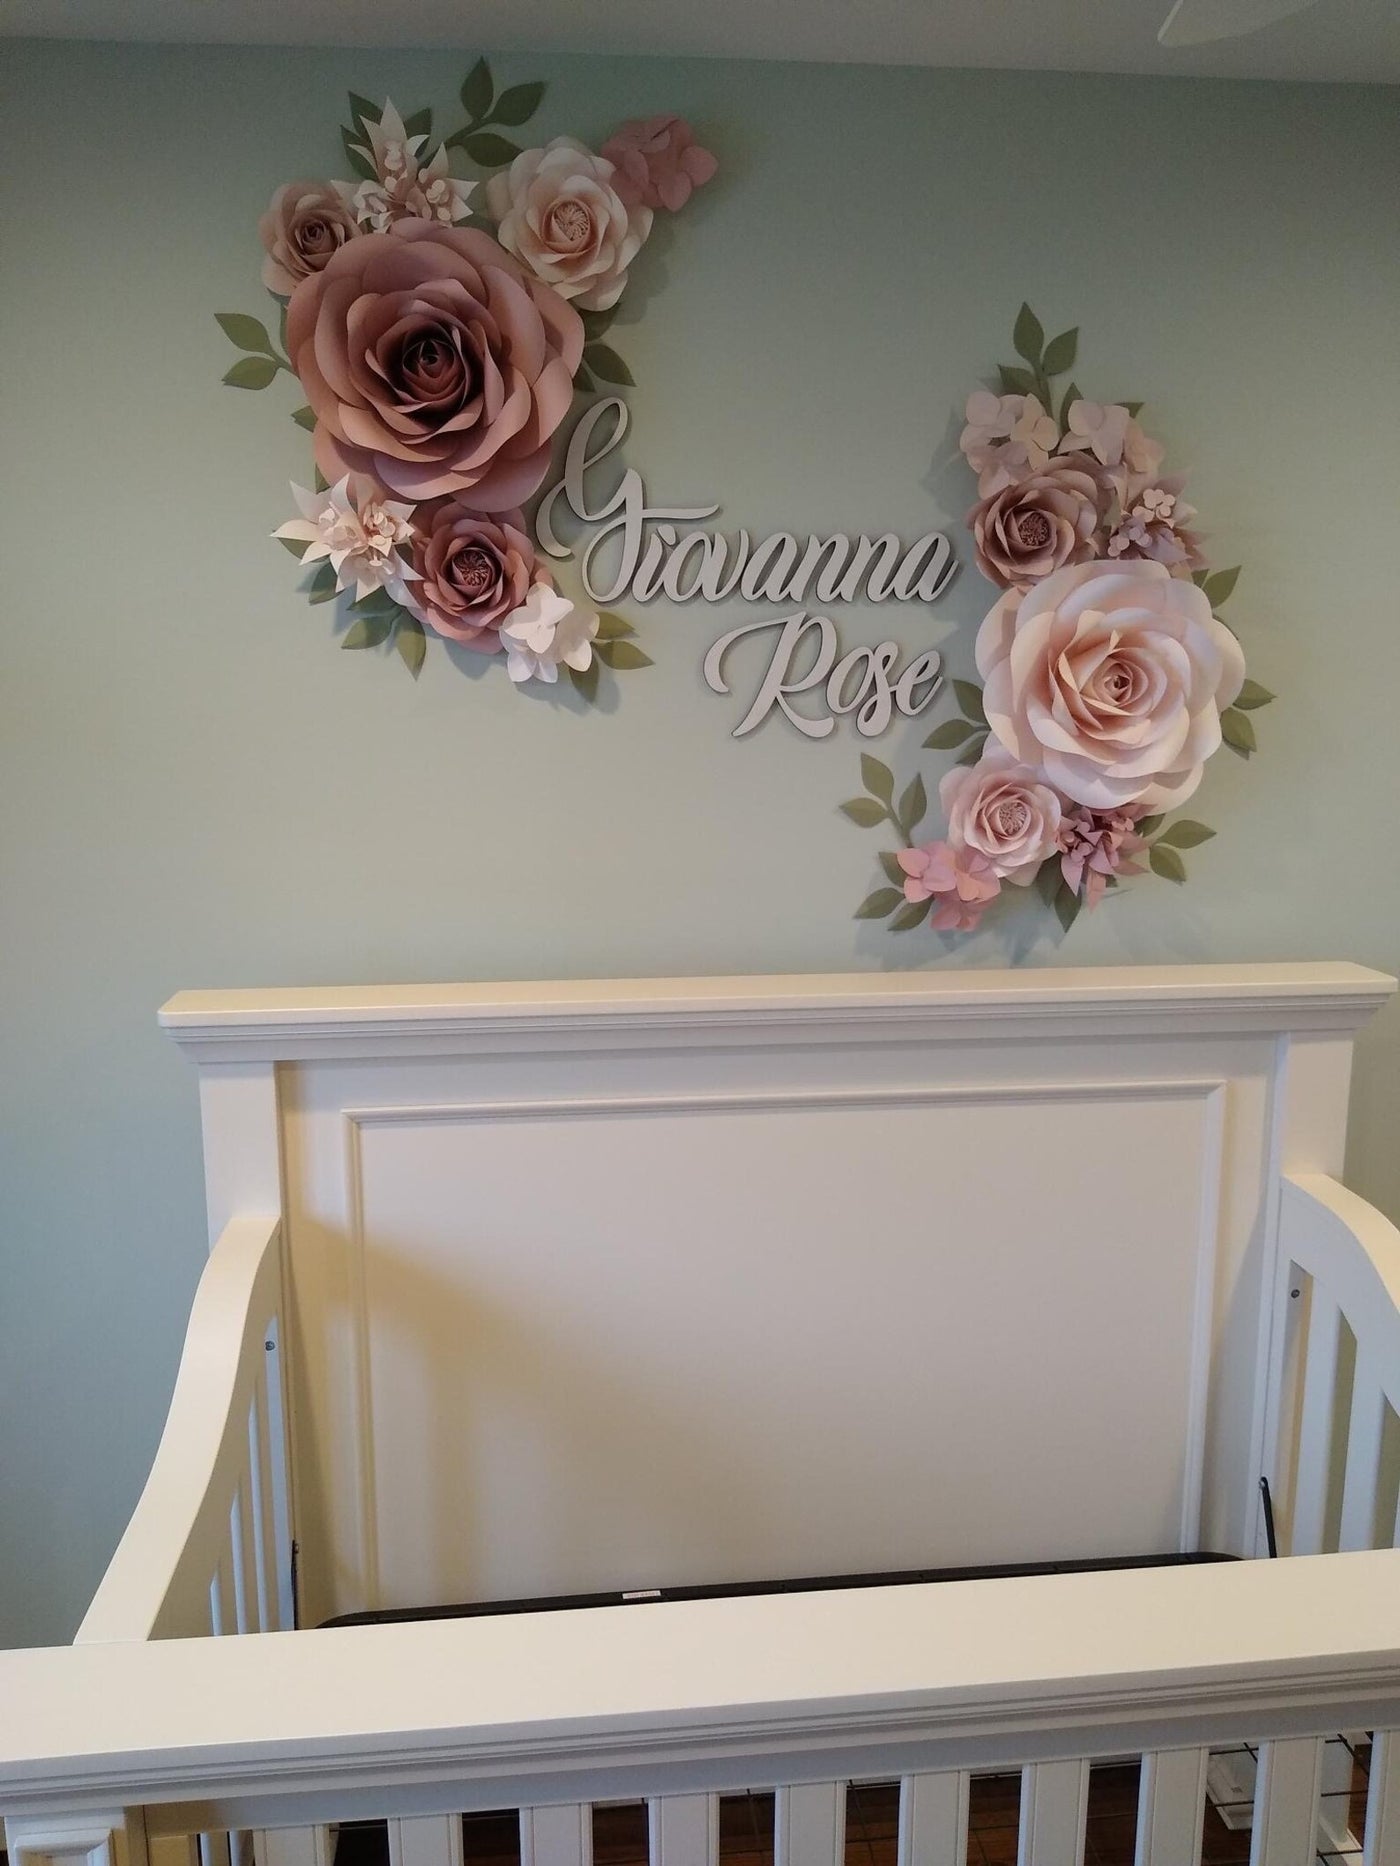 Handcrafted paper flowers beautifully arranged in a nursery, adding a touch of whimsy and charm to the room